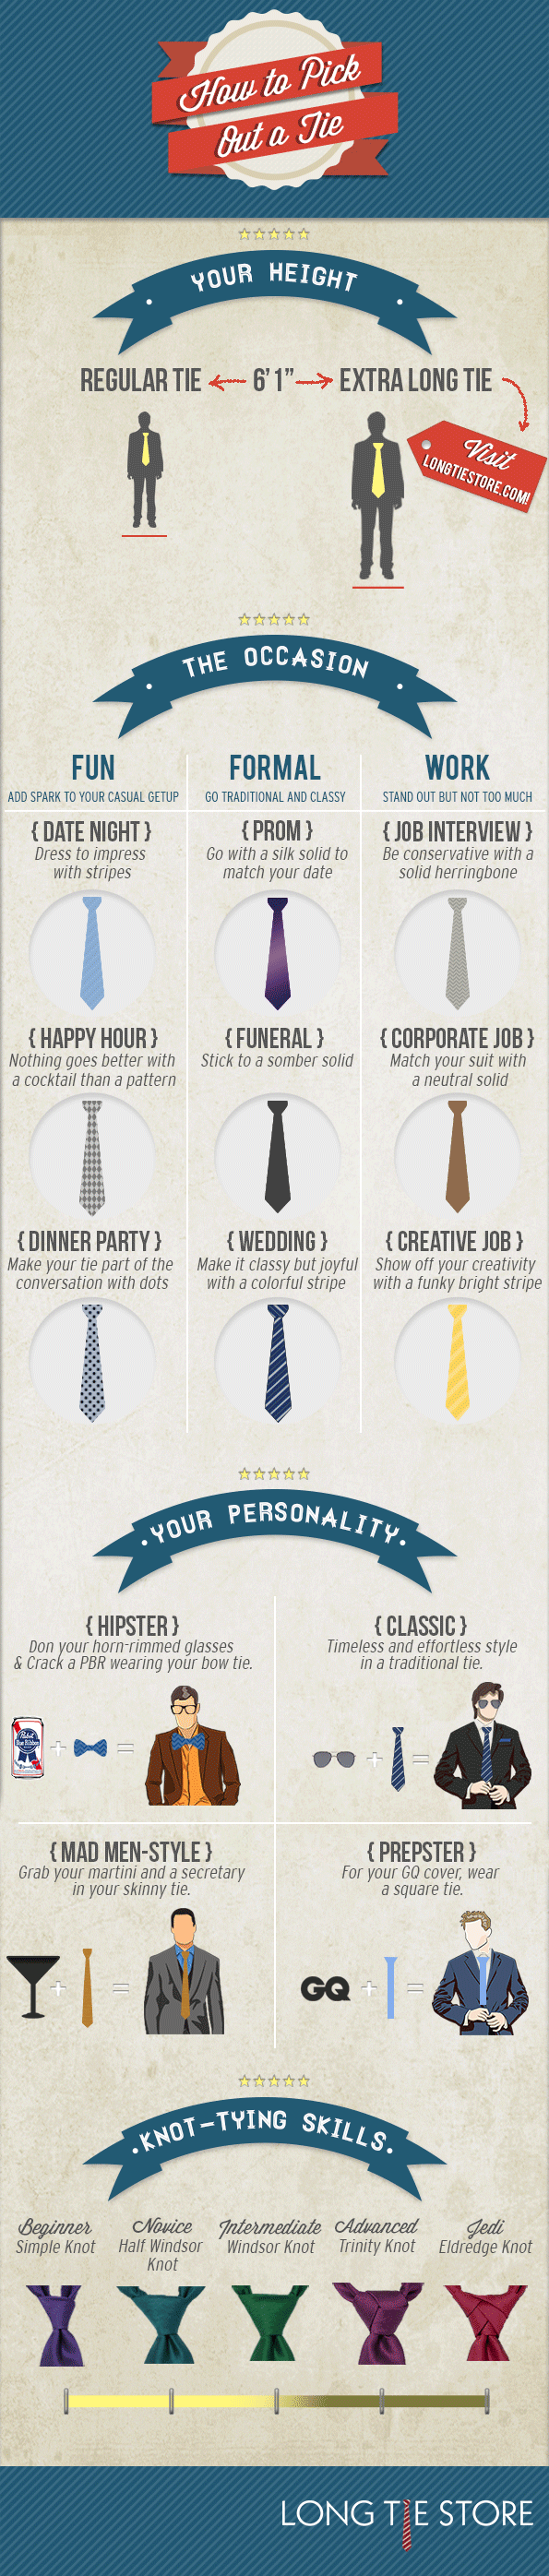 How to Pick Out a Tie [infographic]